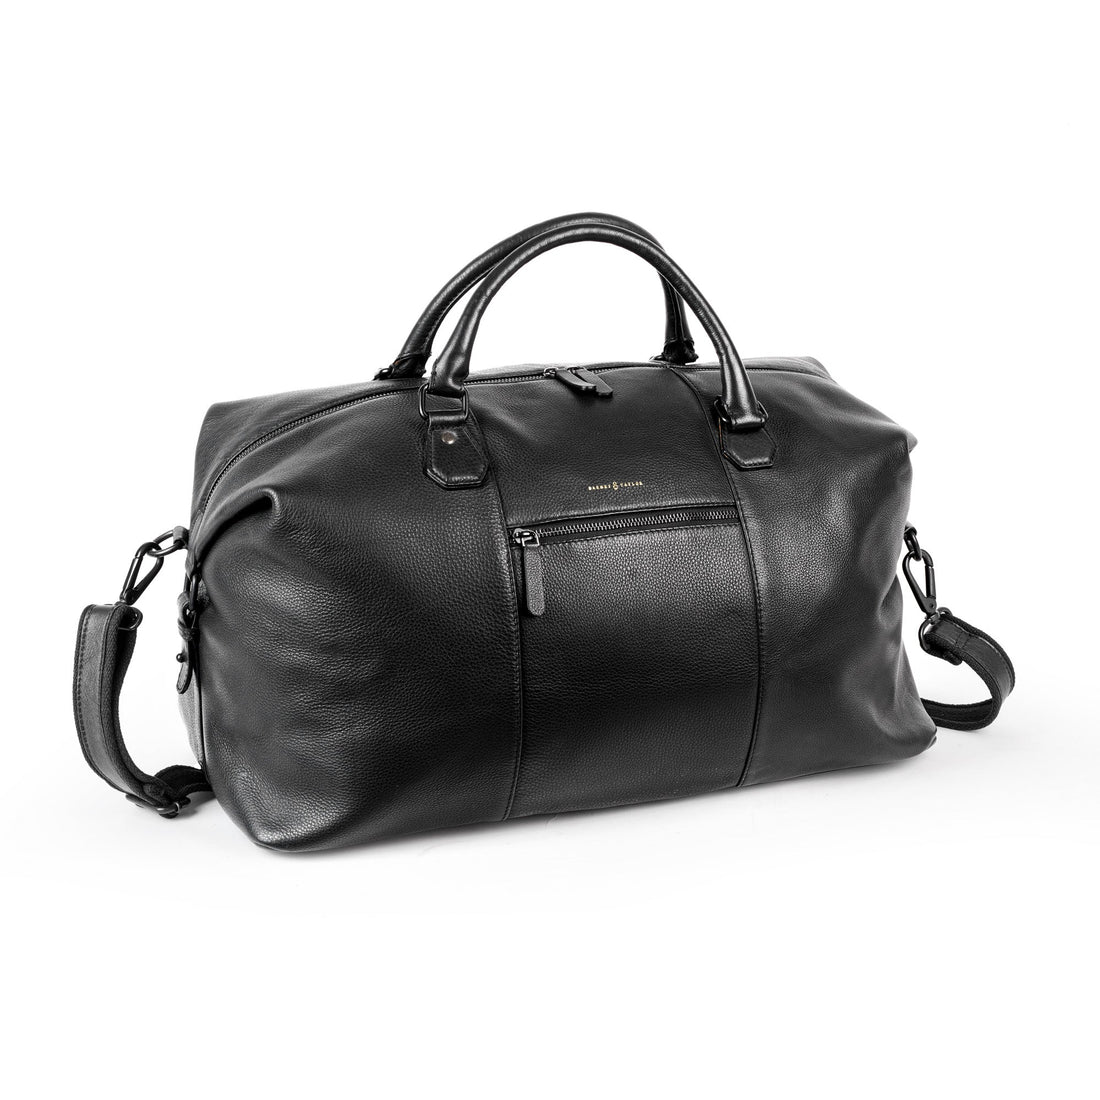 WHY IS IT CALLED A DUFFEL BAG?